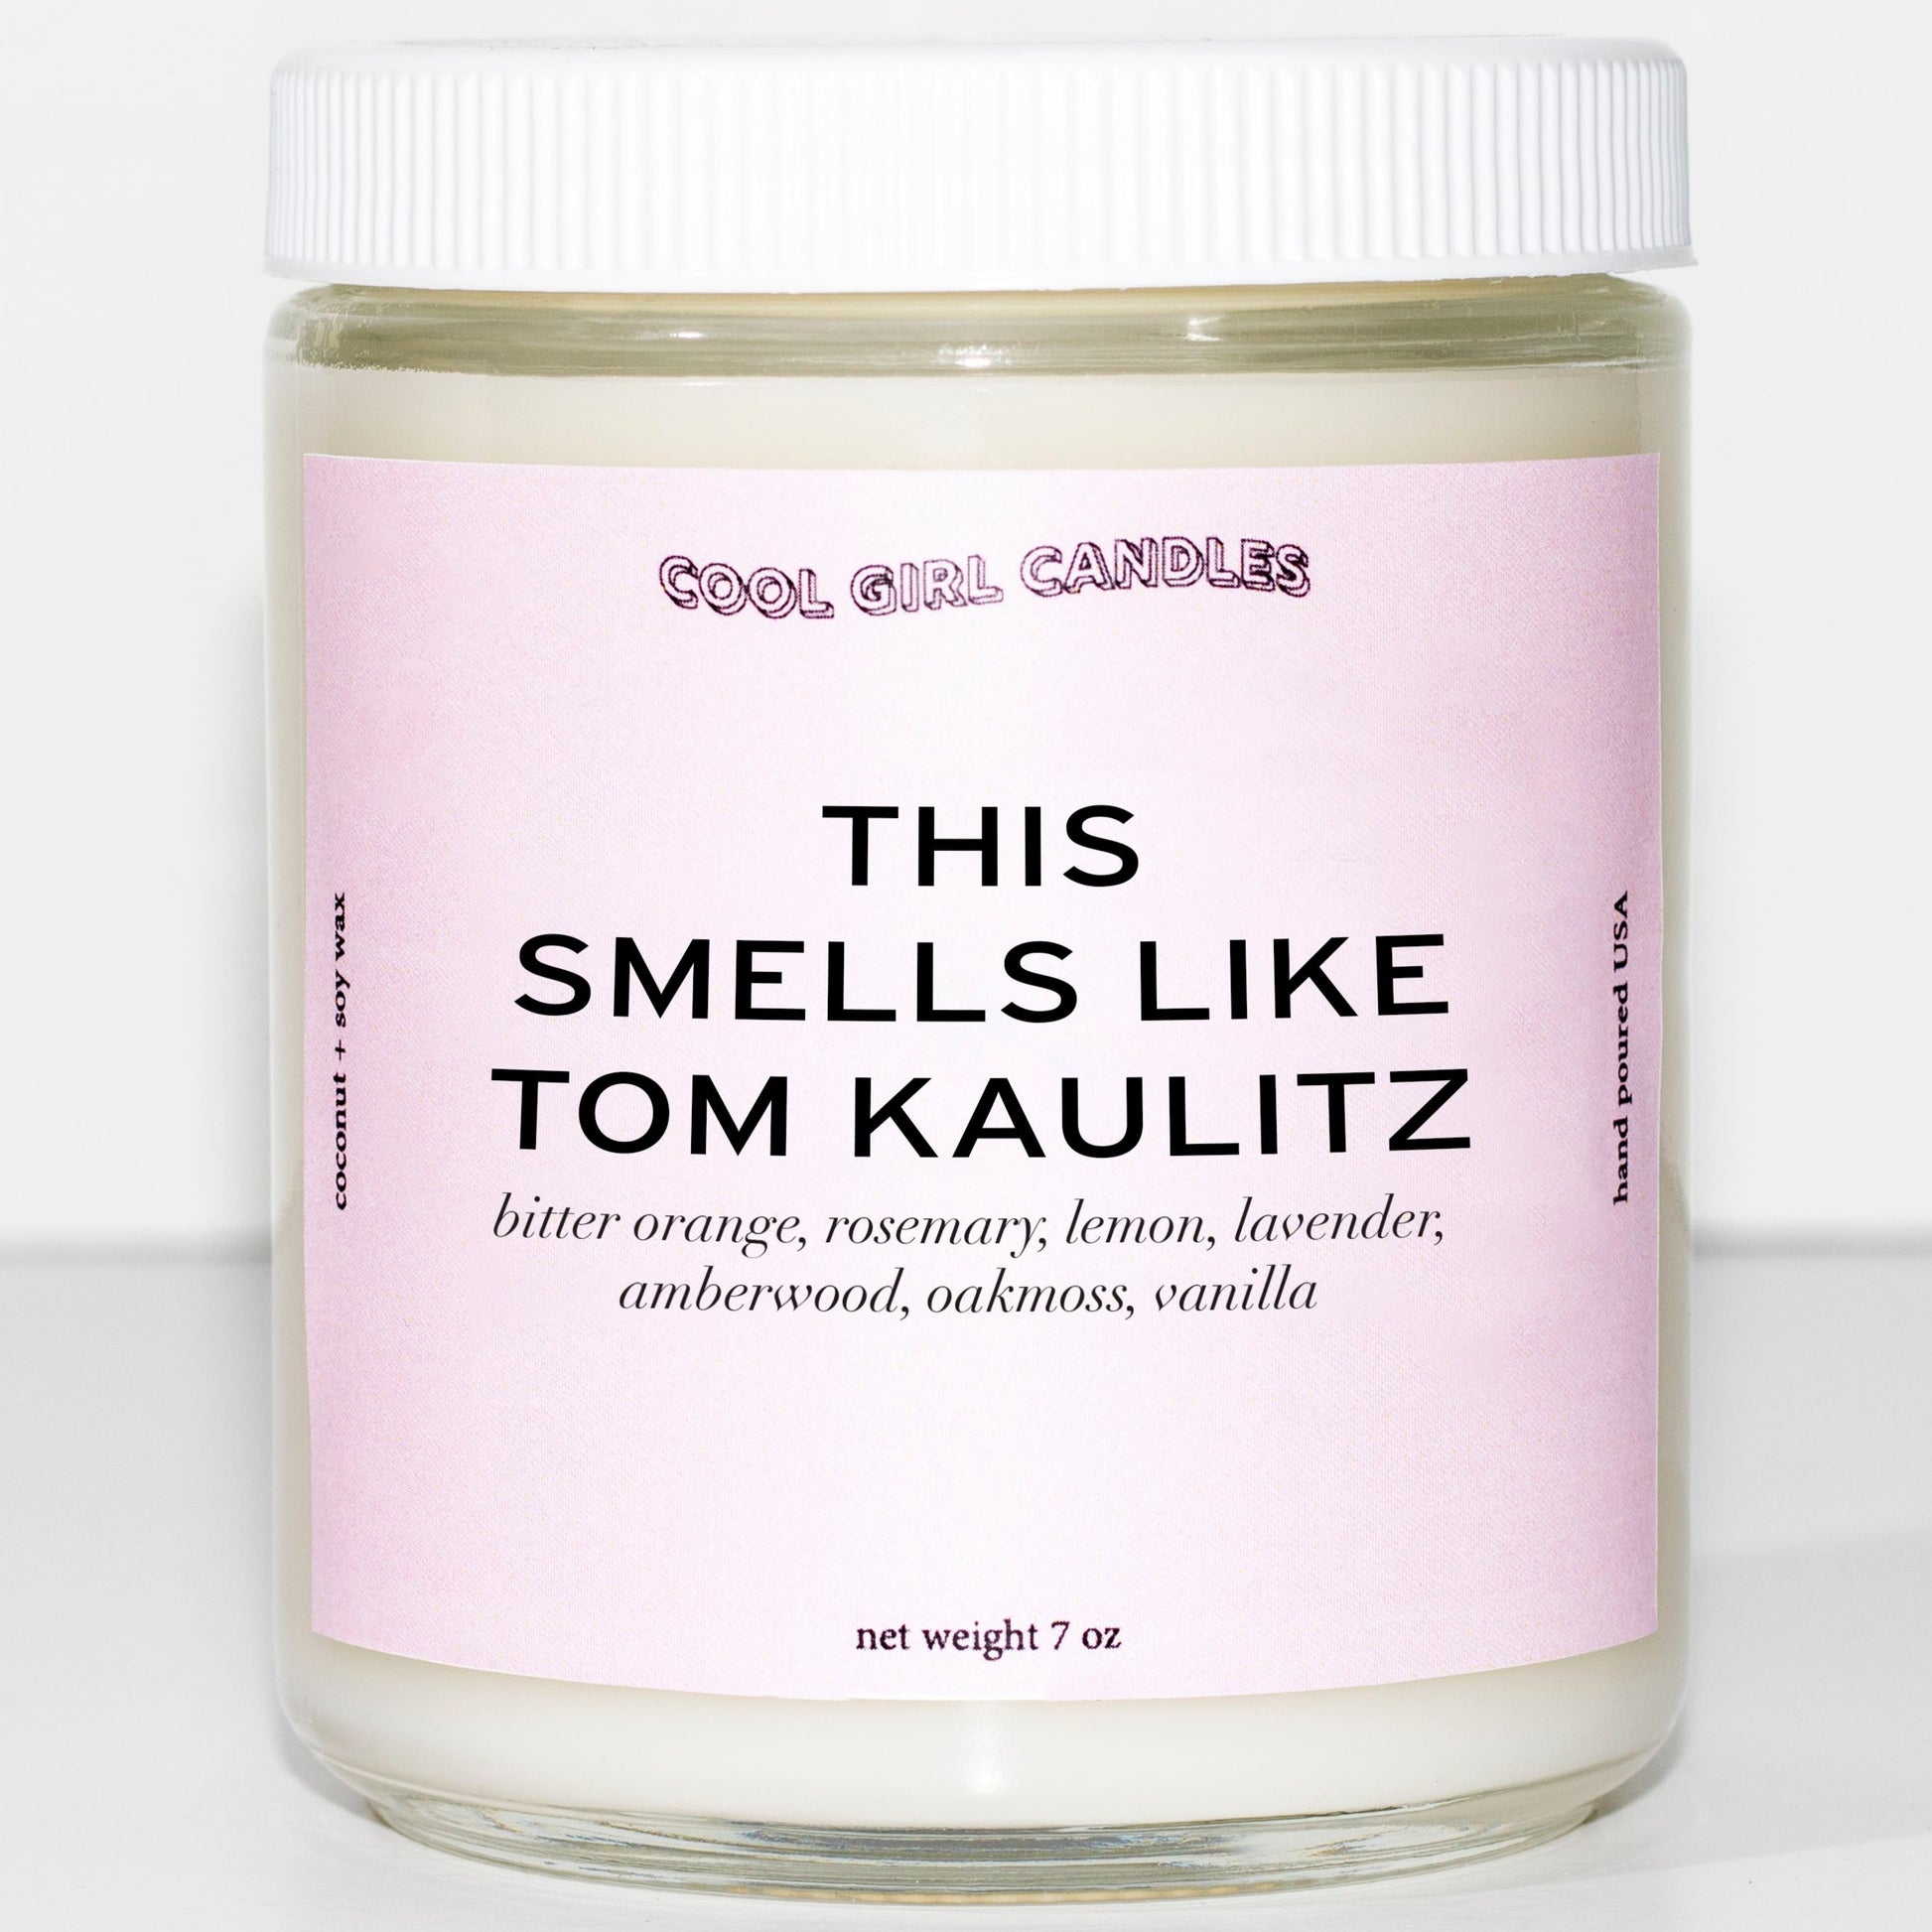 this smells like tom kaulitz candle. A candle by cool girl candles that smells like your favorite celebrity musician Tom Kaulitz